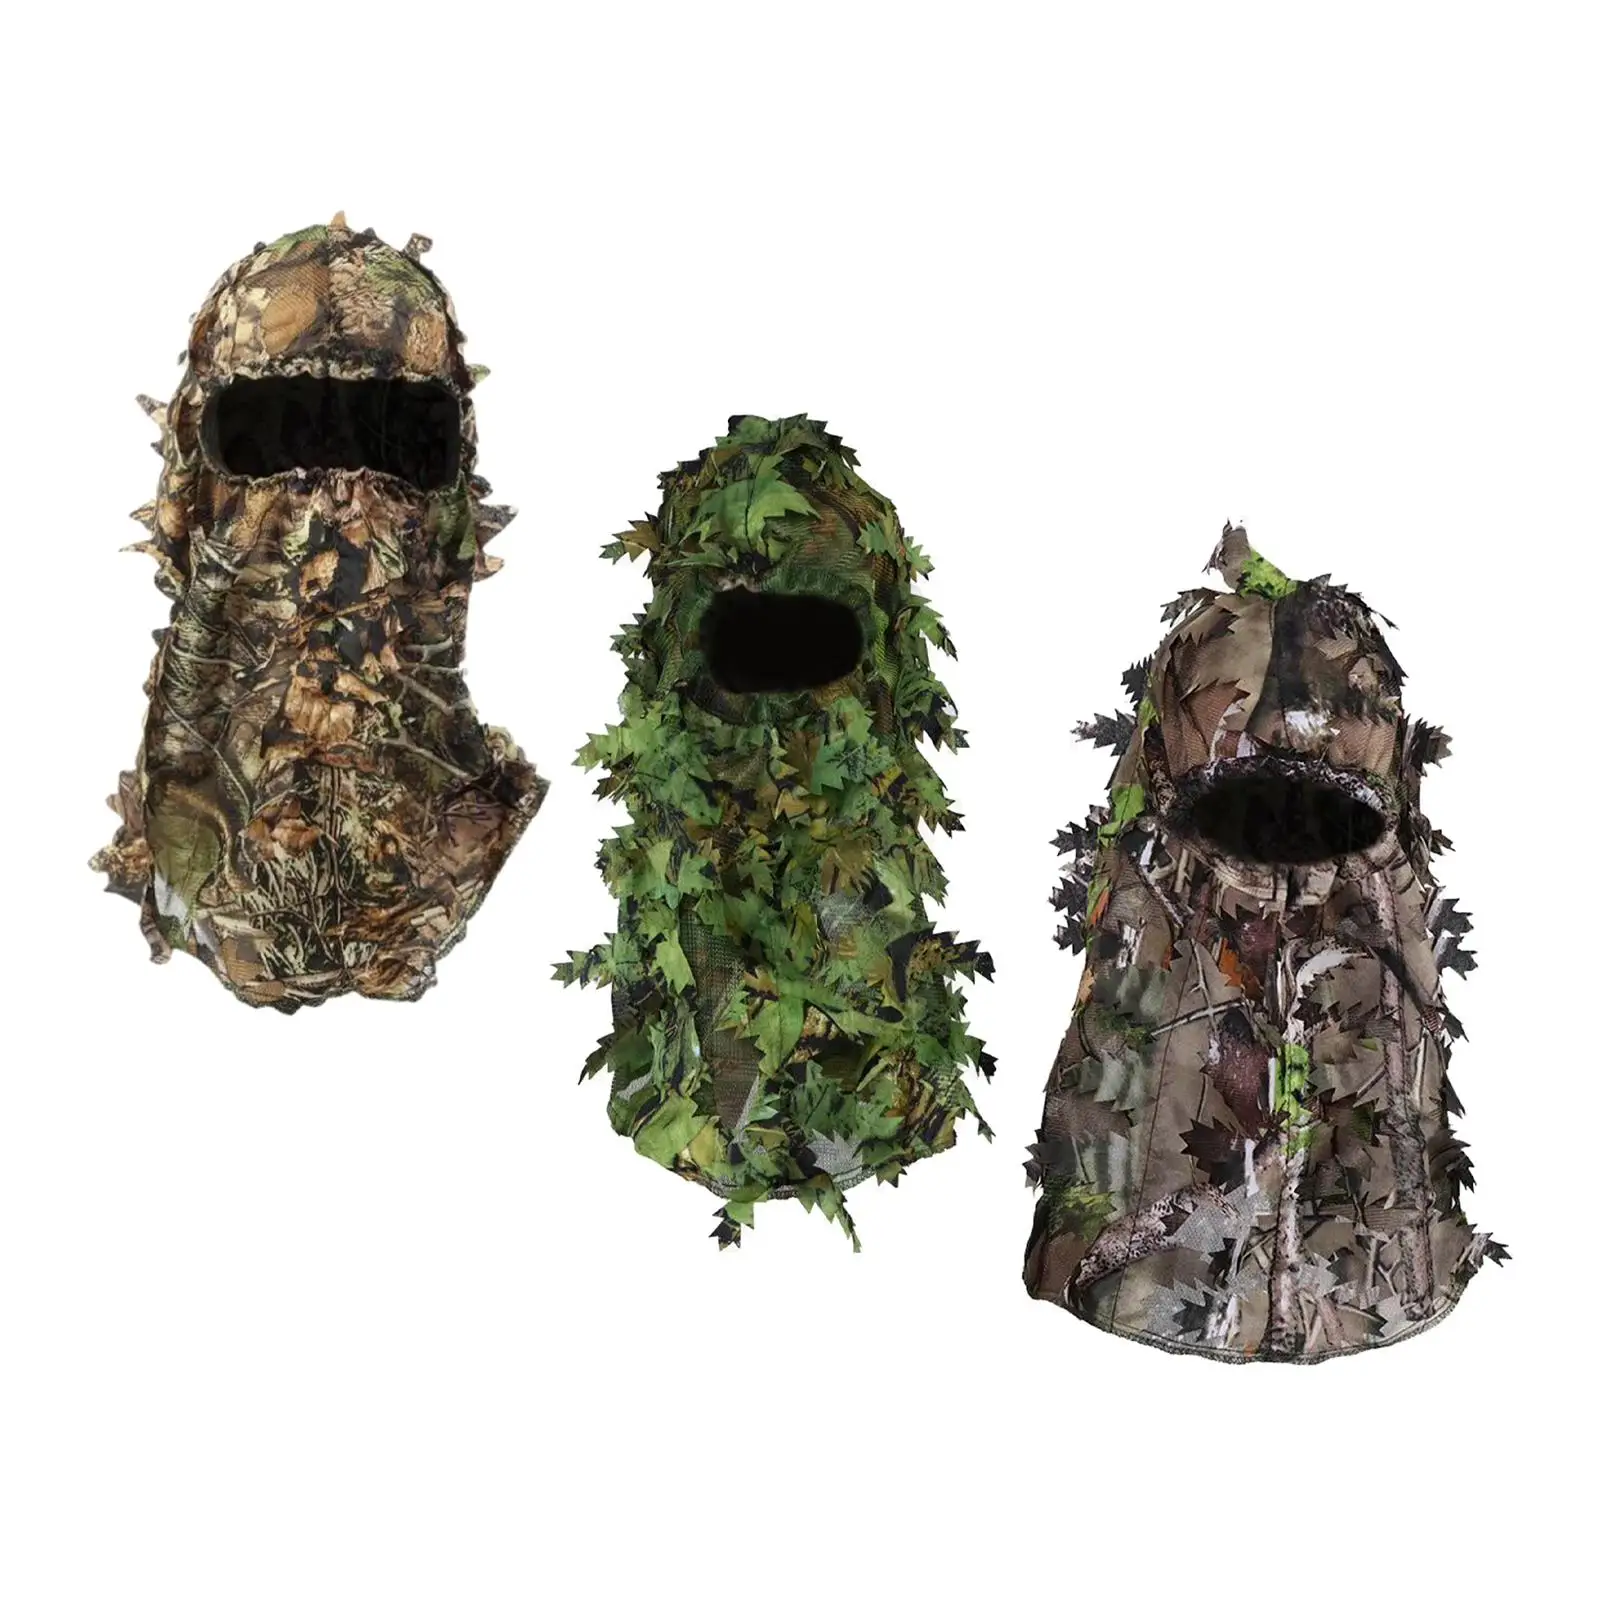 3D Camouflage Leafy Hat Disguise Breathable Lightweight Camo Ghillie Headwear for Forest Halloween Cosplay Turkey